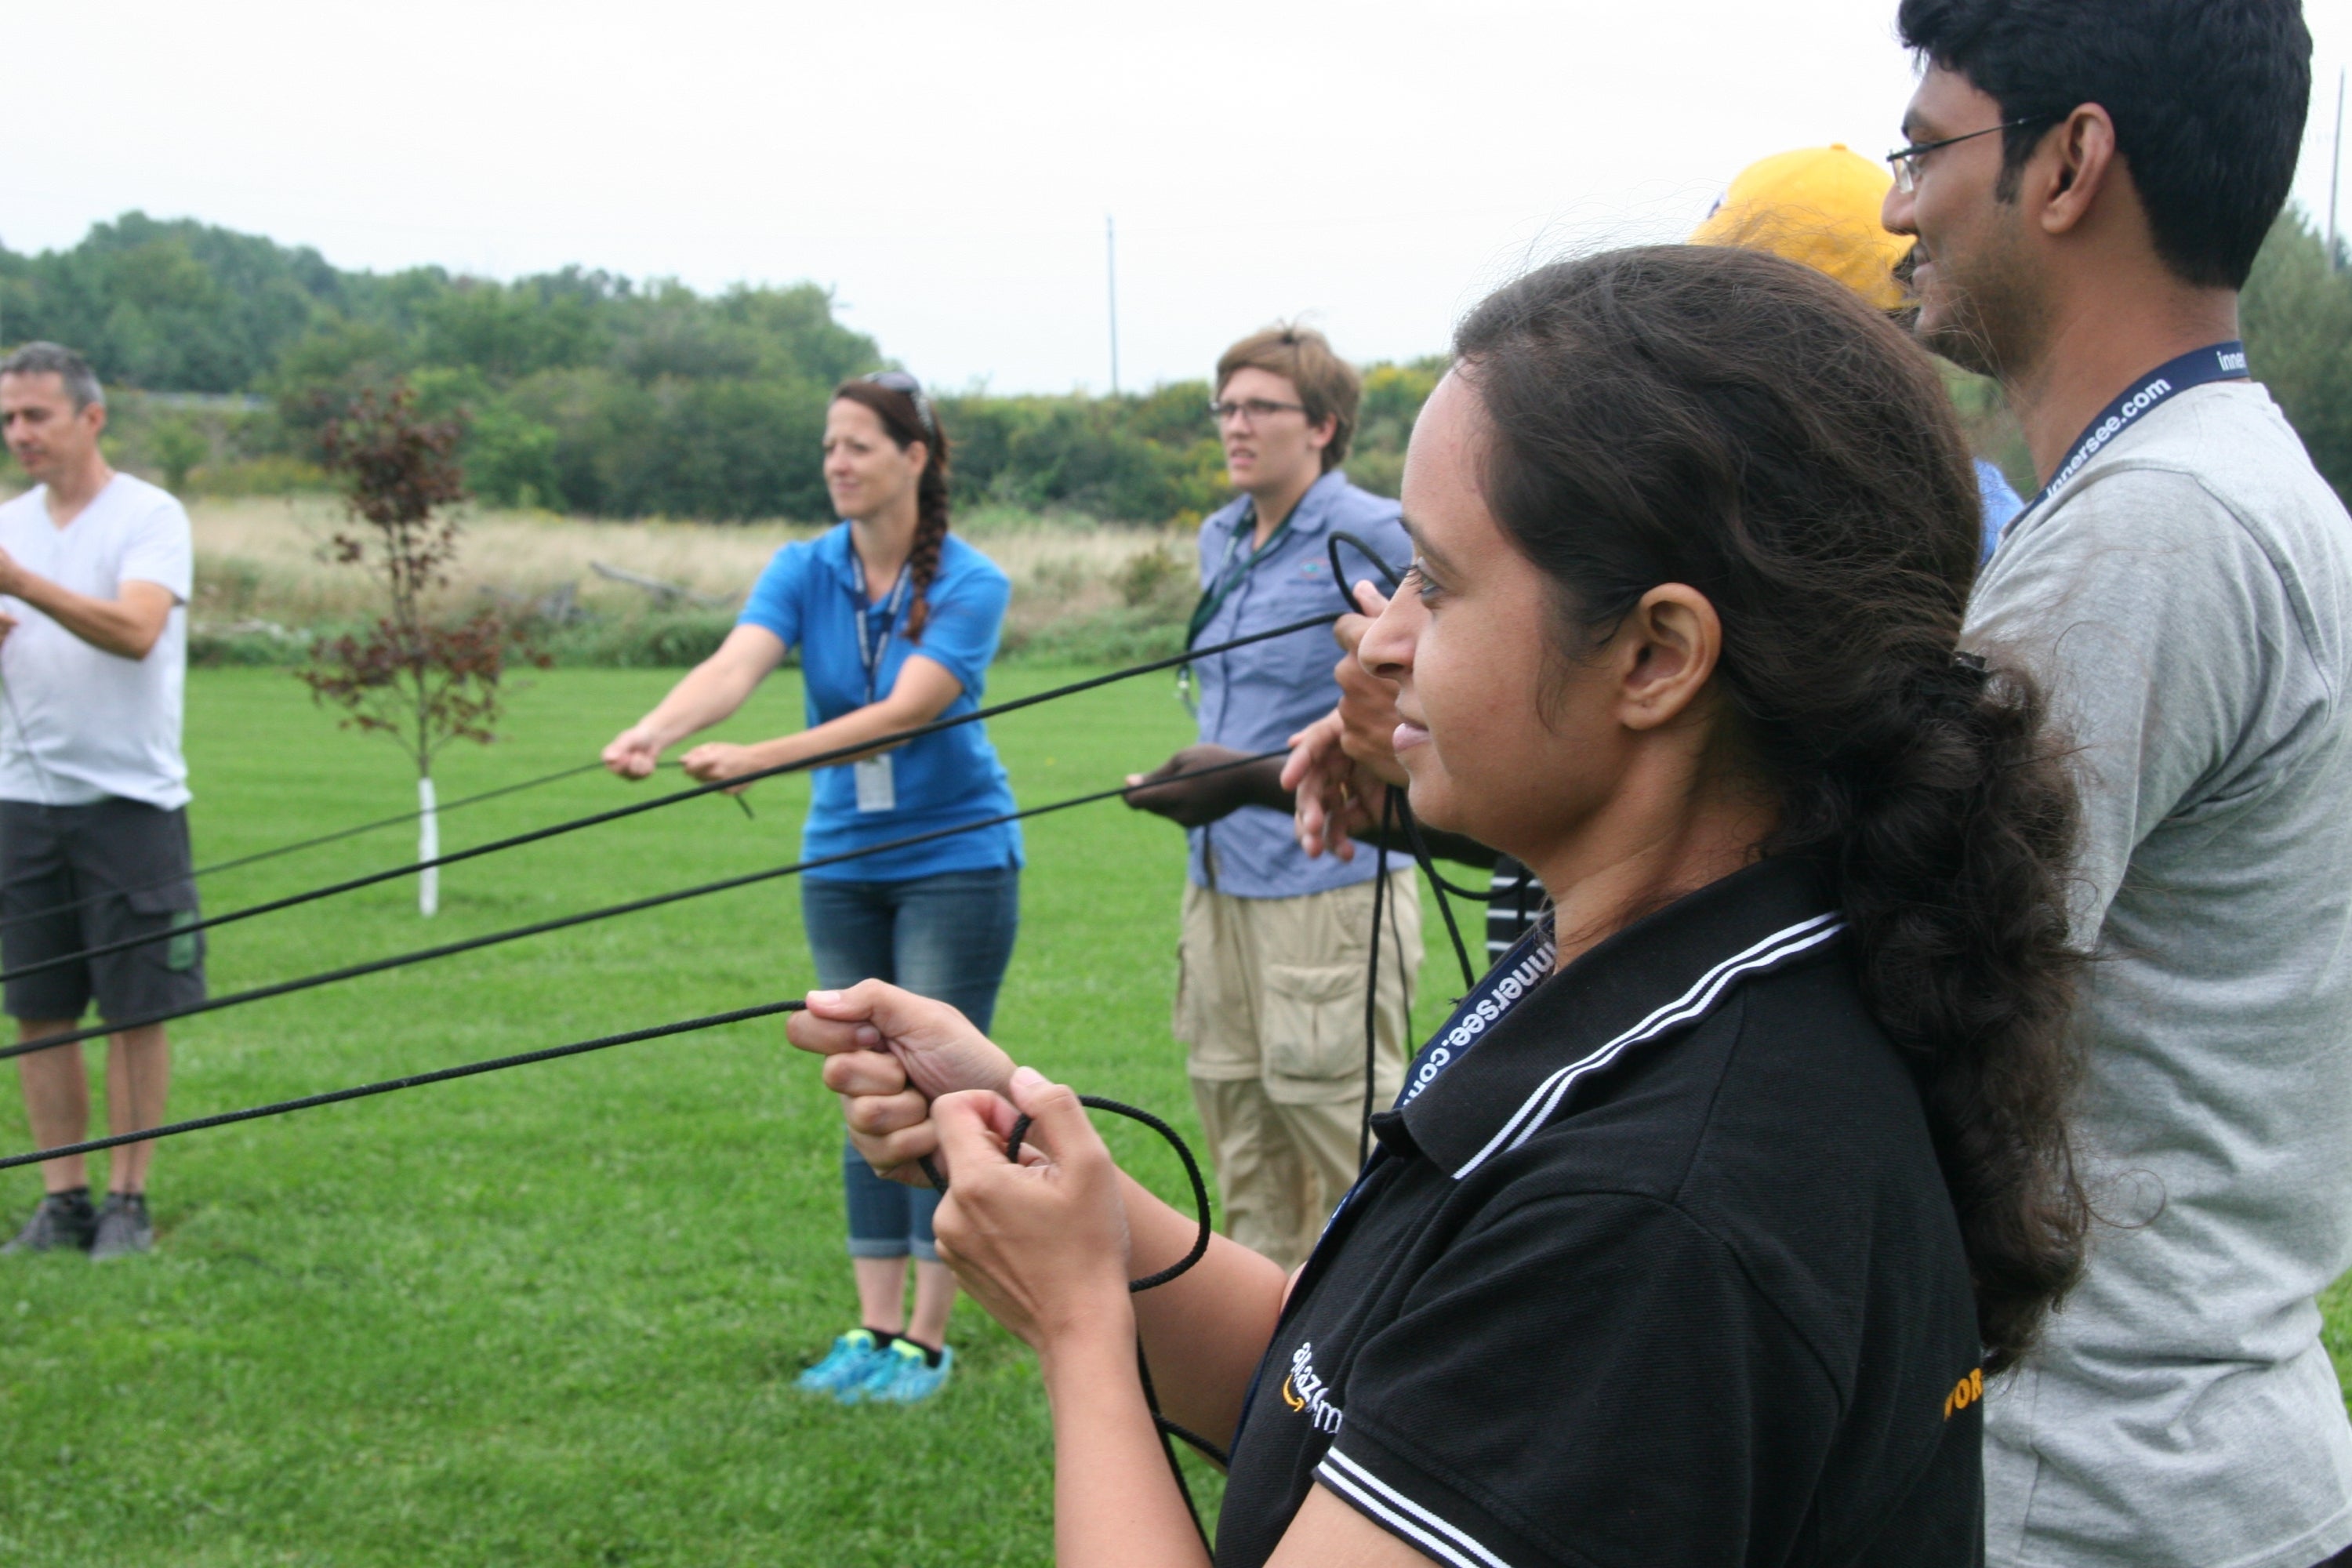 Students holding rope during group activity